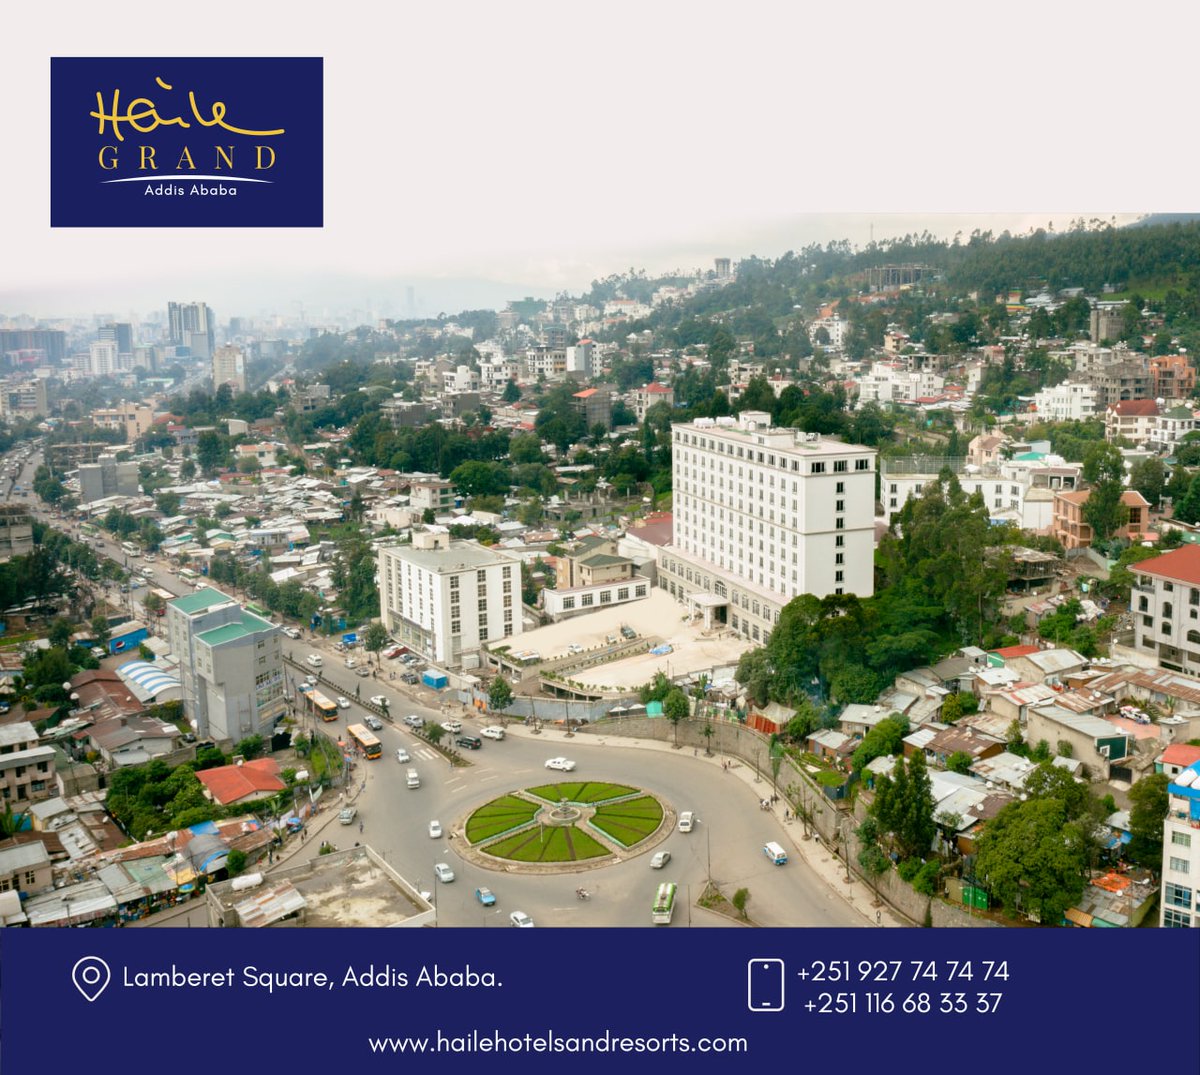 Our big surprise is just around the corner! Are you ready yet to welcome the new member of the family? #addisababa #hailehotelsandresorts